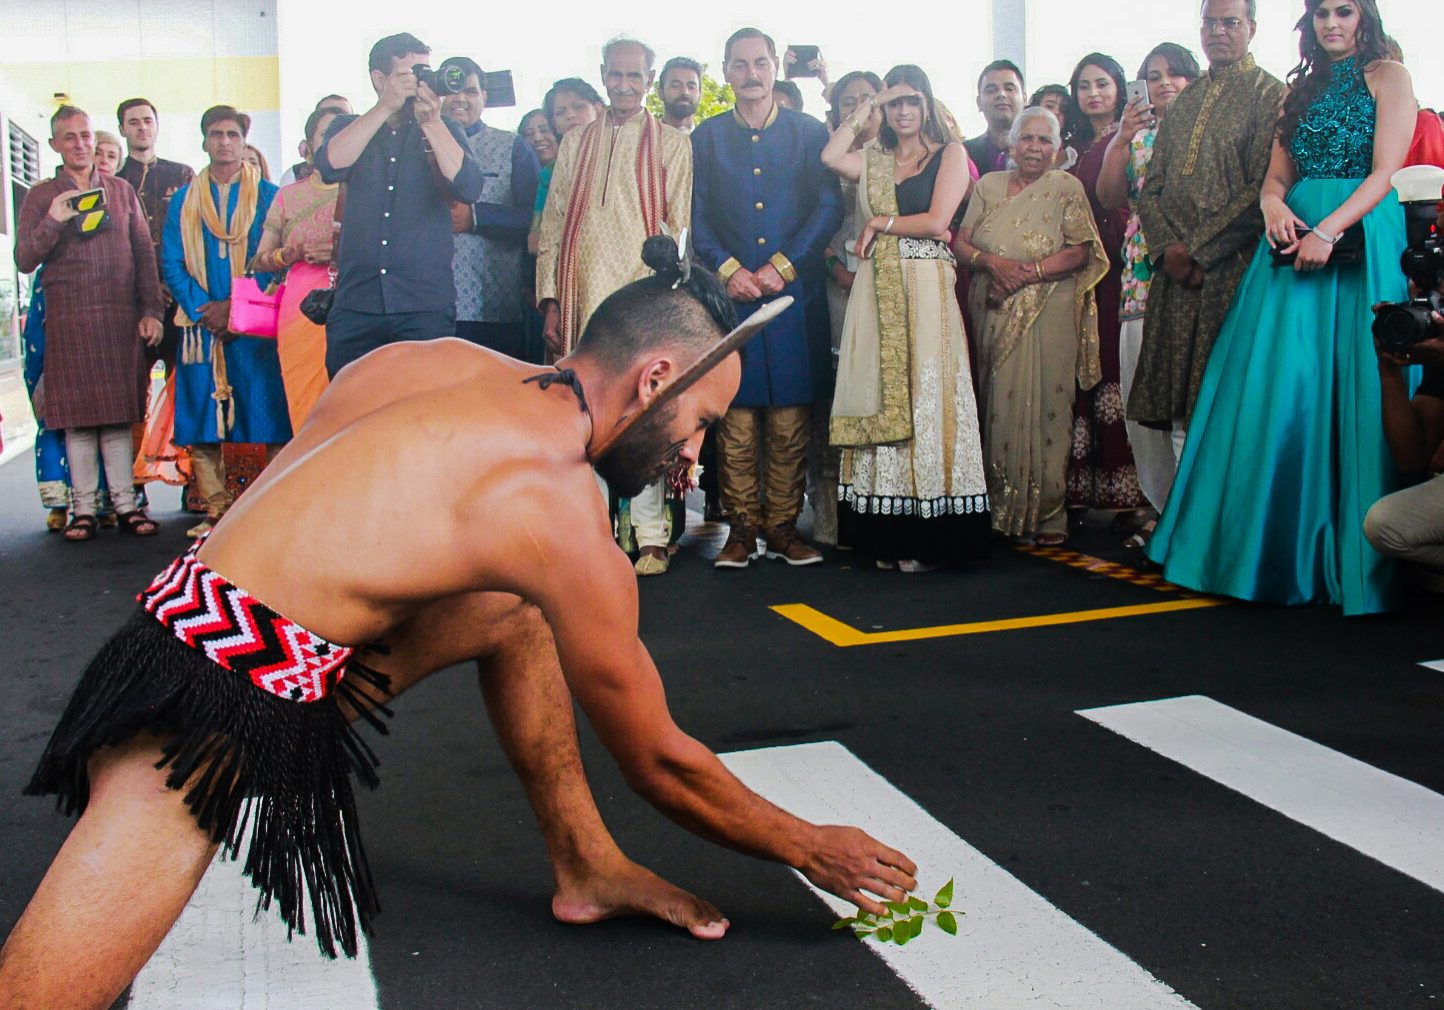 The wero (challenge) performed during the haka pōwhiri by one of our Māori warriors.